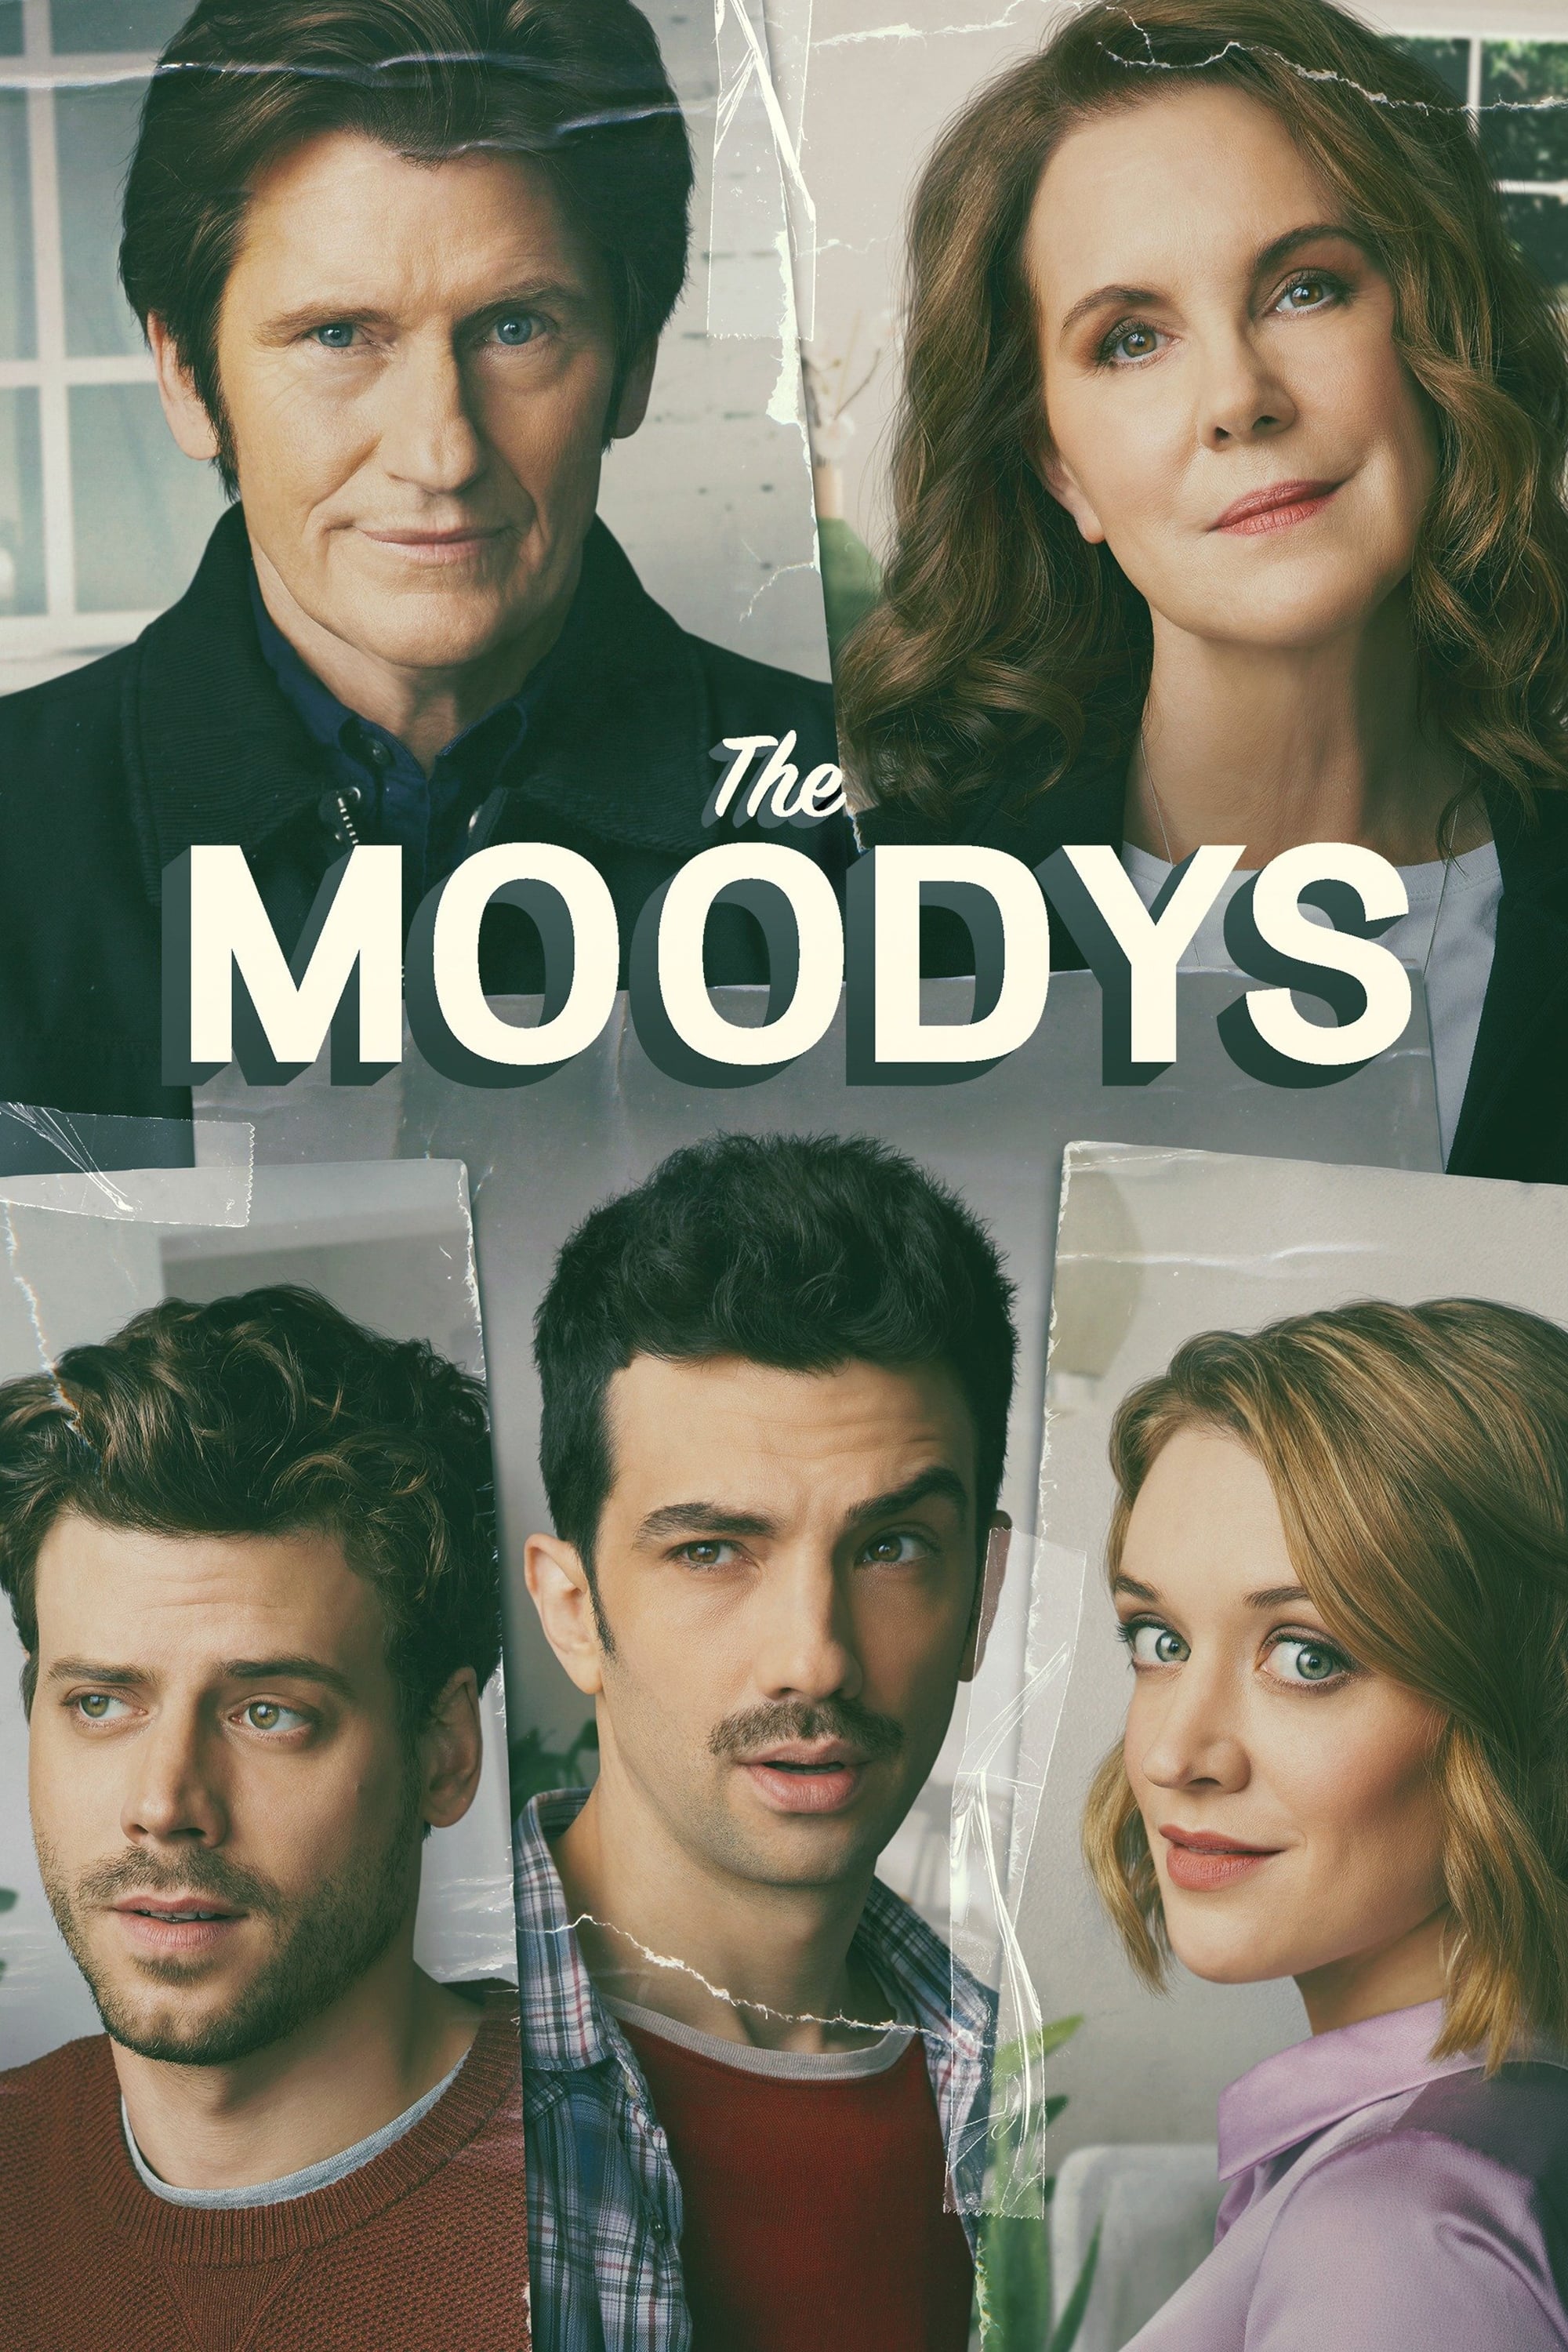 The Moodys (2019)